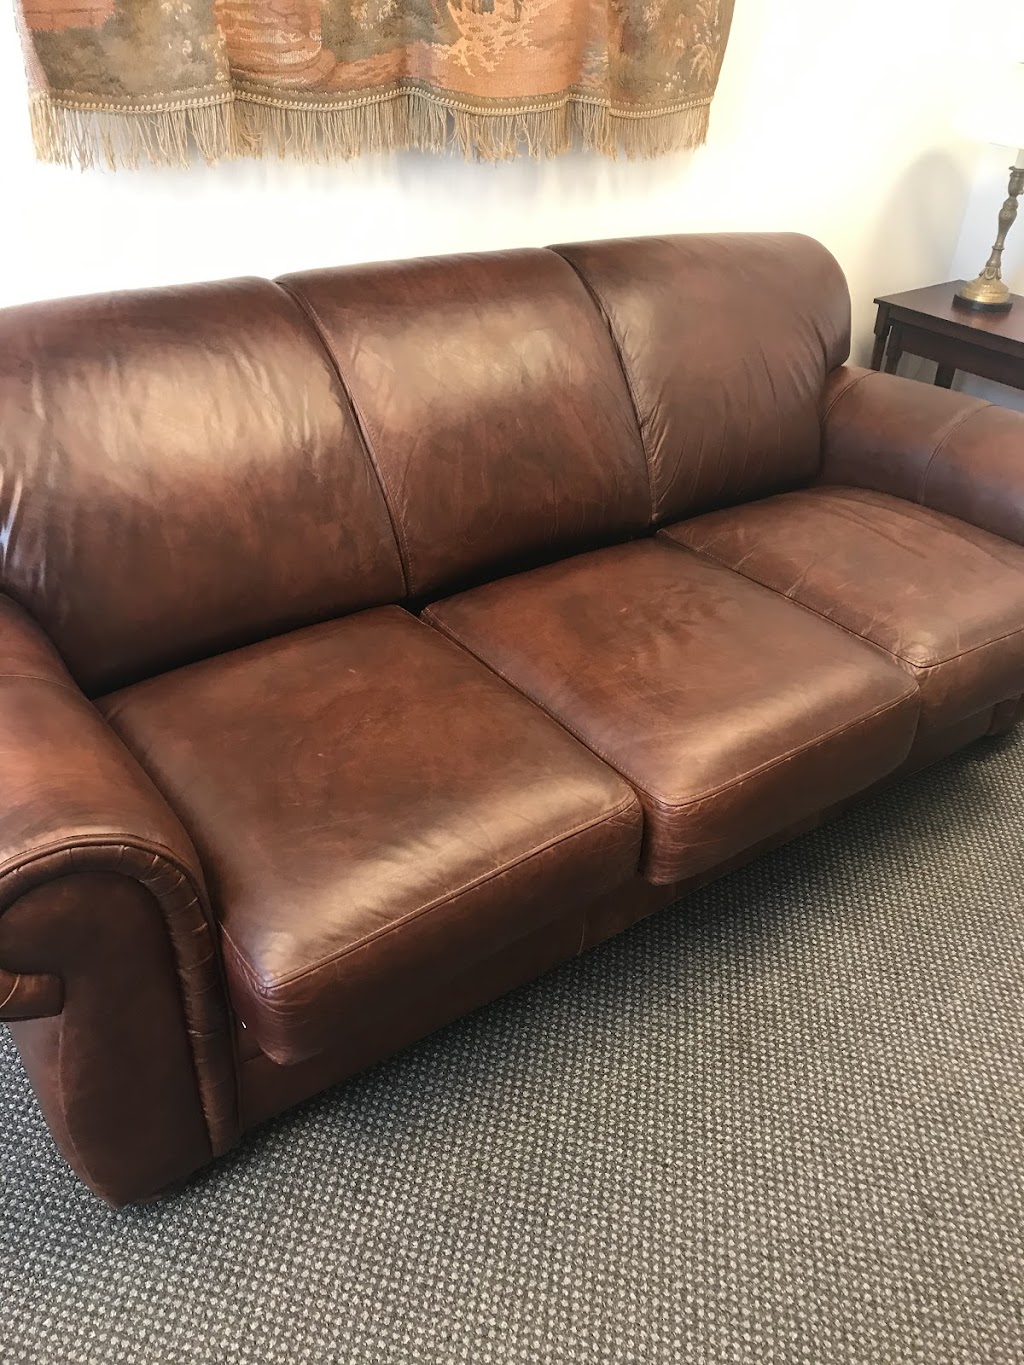 L V Upholstery & Leather care | 4355 Emerson St, Skokie, IL 60076 | Phone: (847) 798-6490